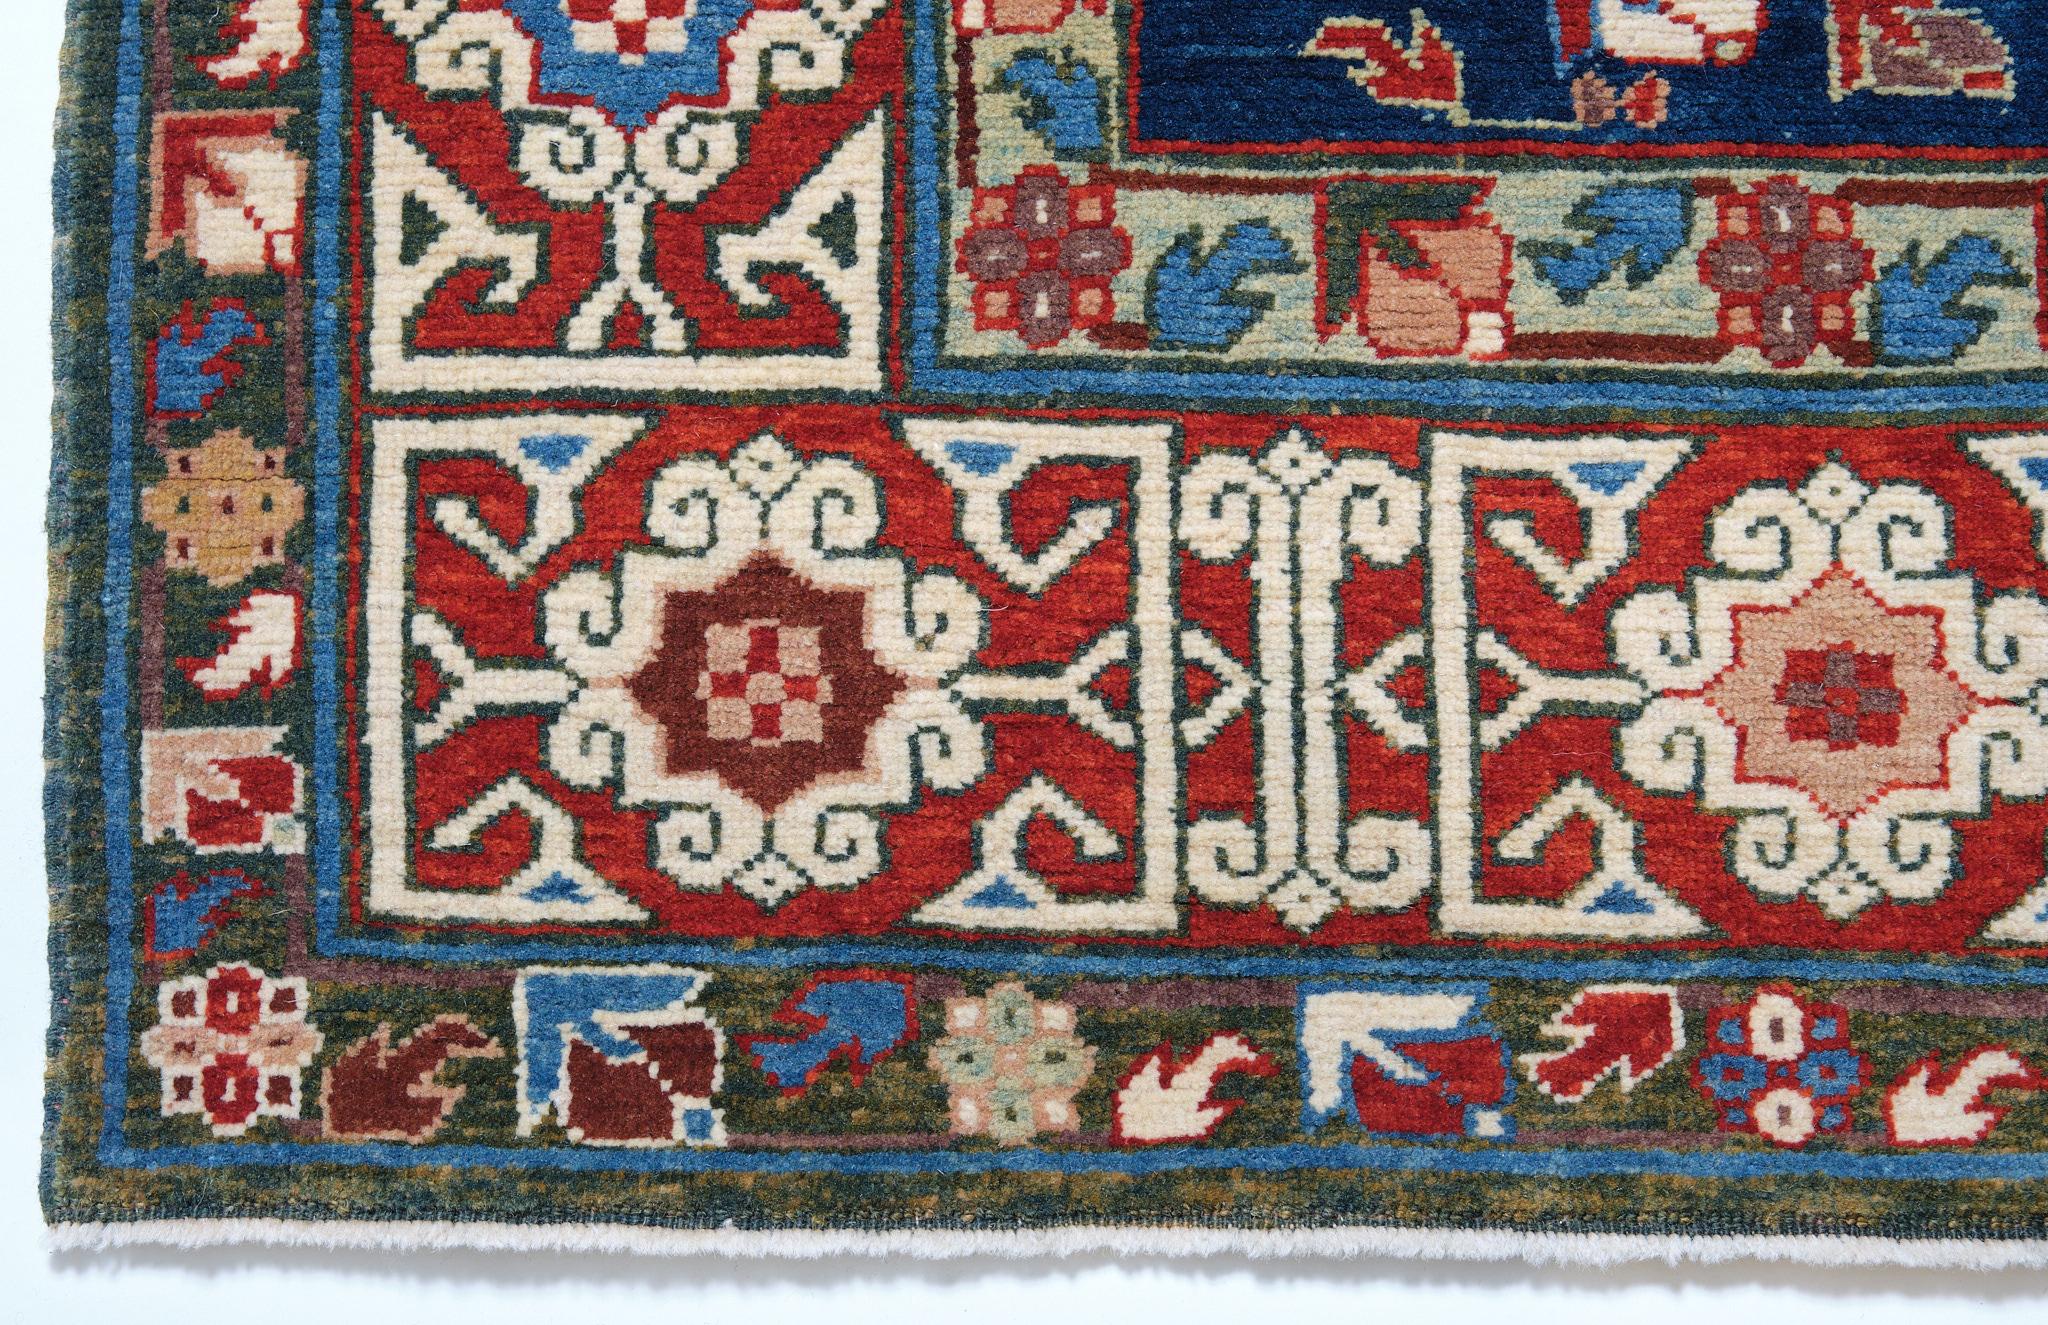 Turkish Ararat Rugs Harshang Design with Kufic Border Rug Revival Carpet, Natural Dyed For Sale